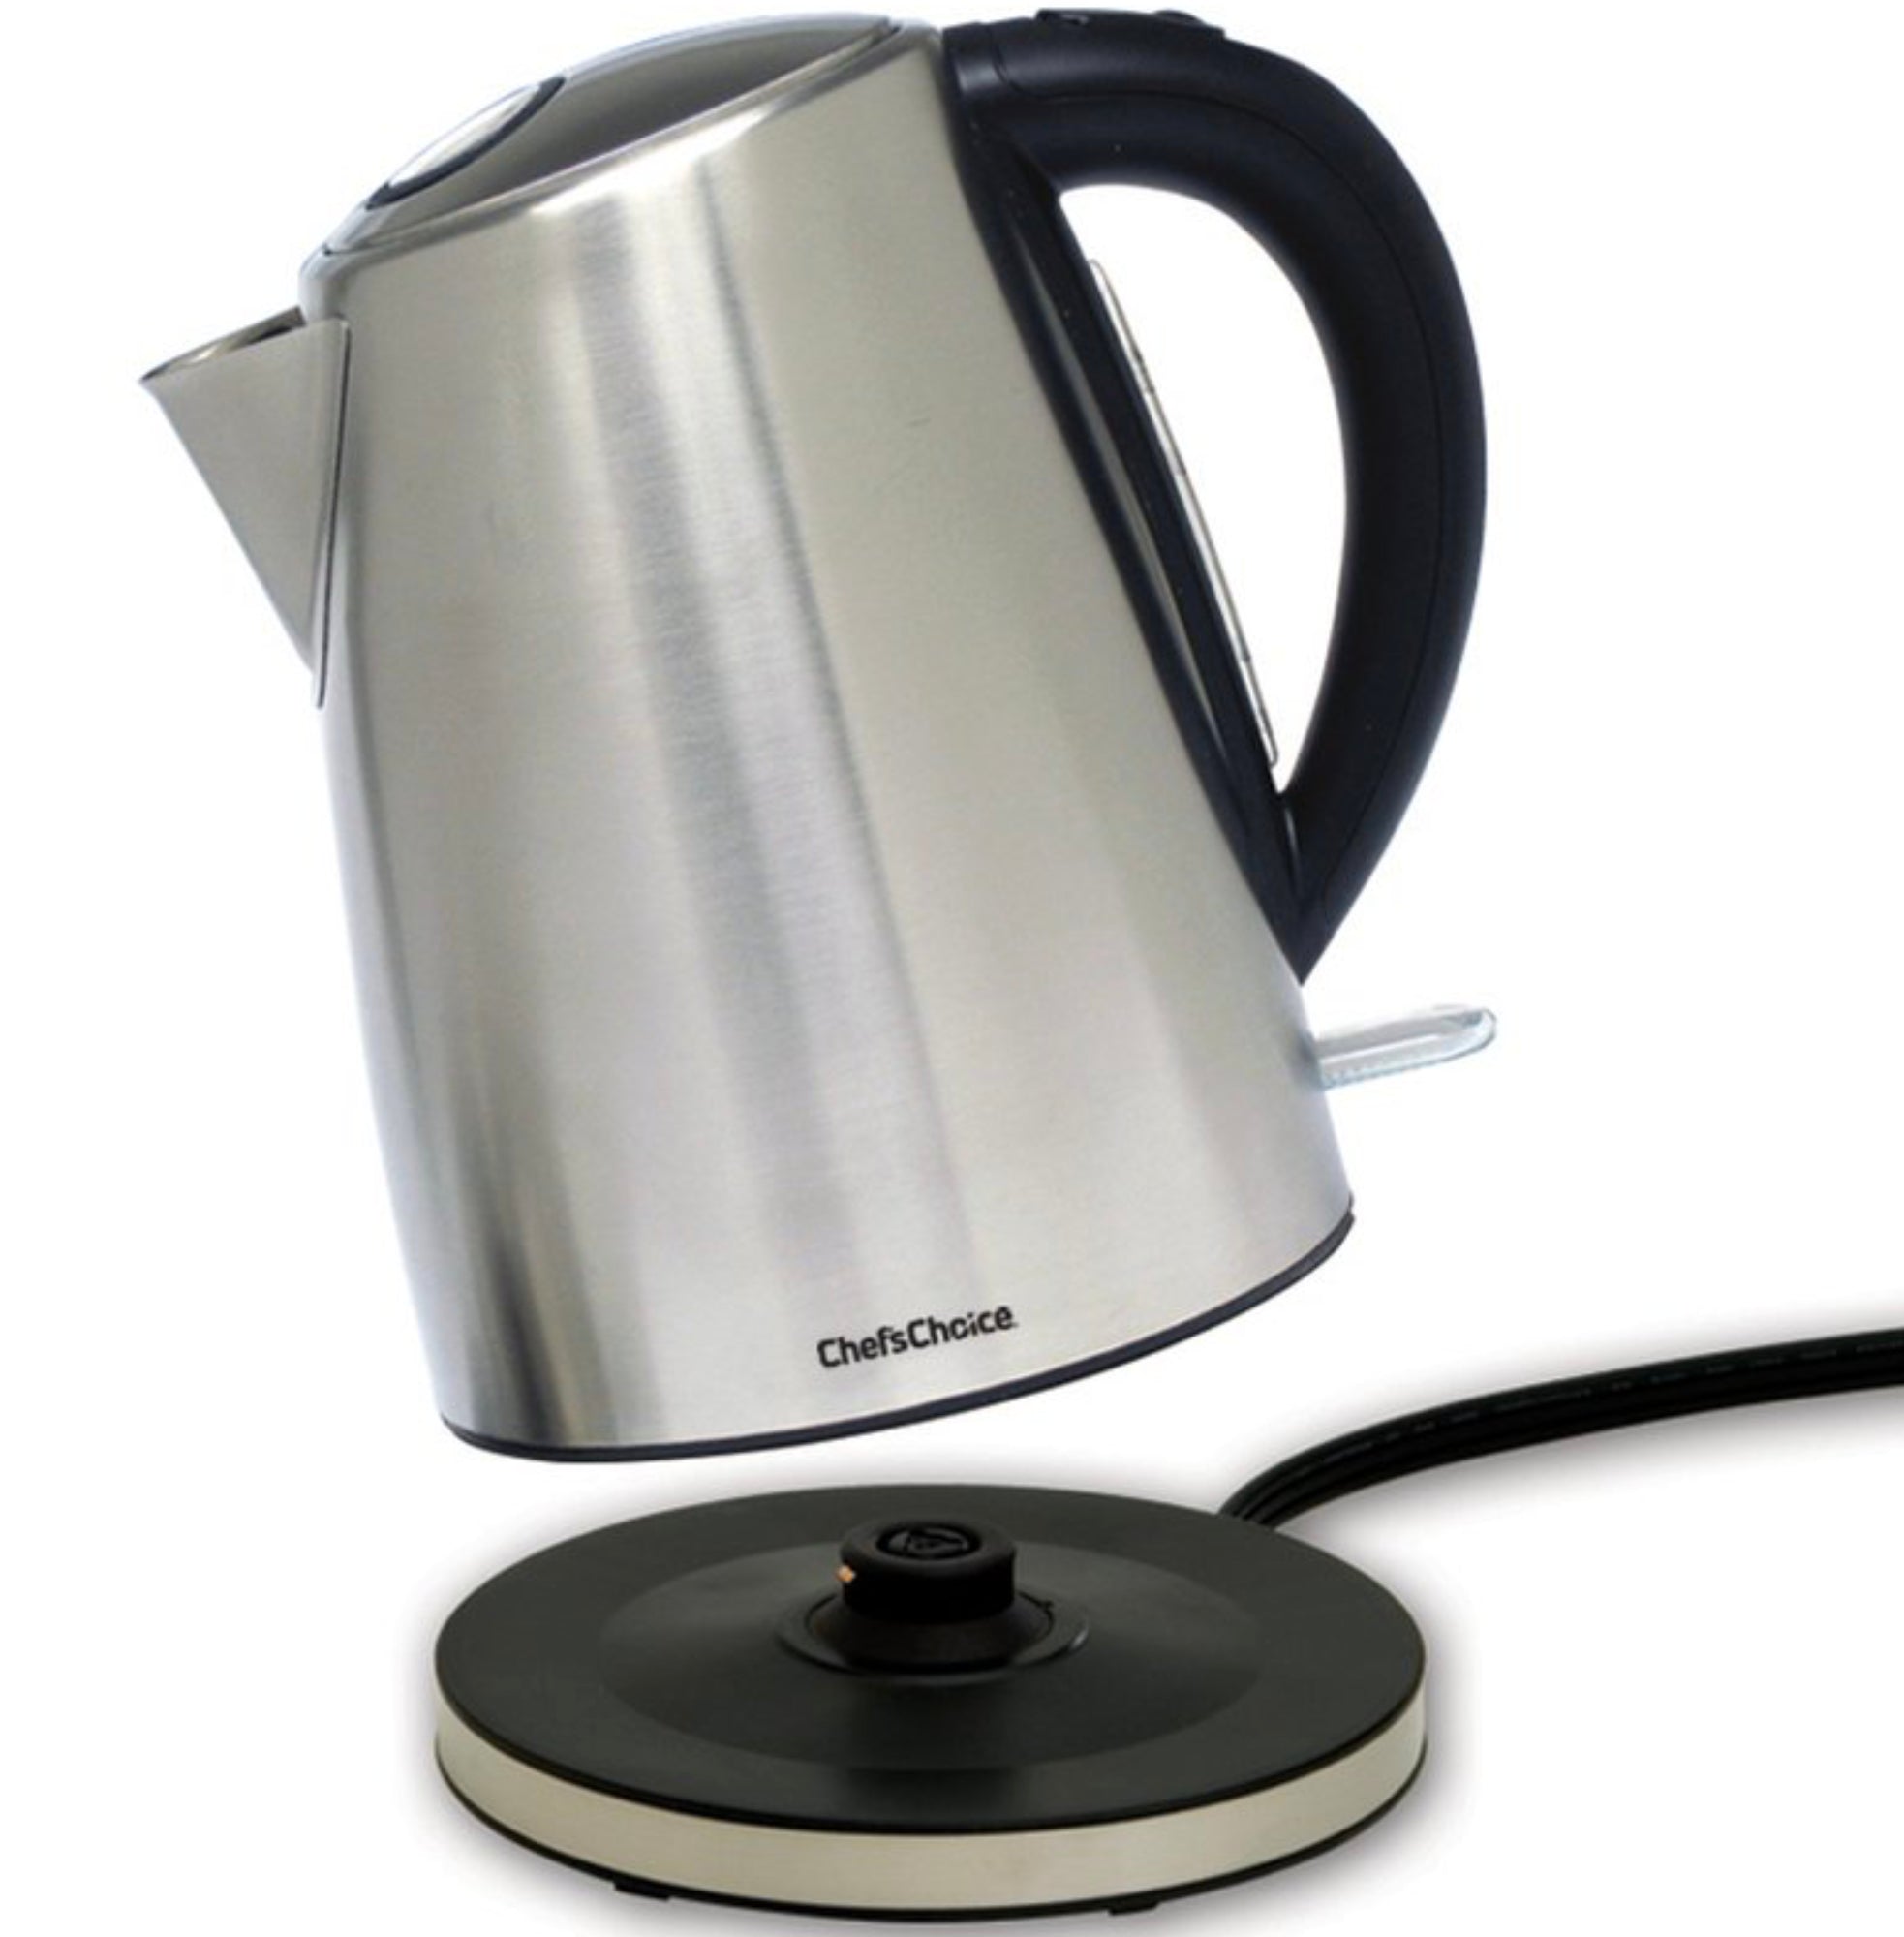 Chef’s Choice Cordless Electric Kettle – 1.75 Quarts